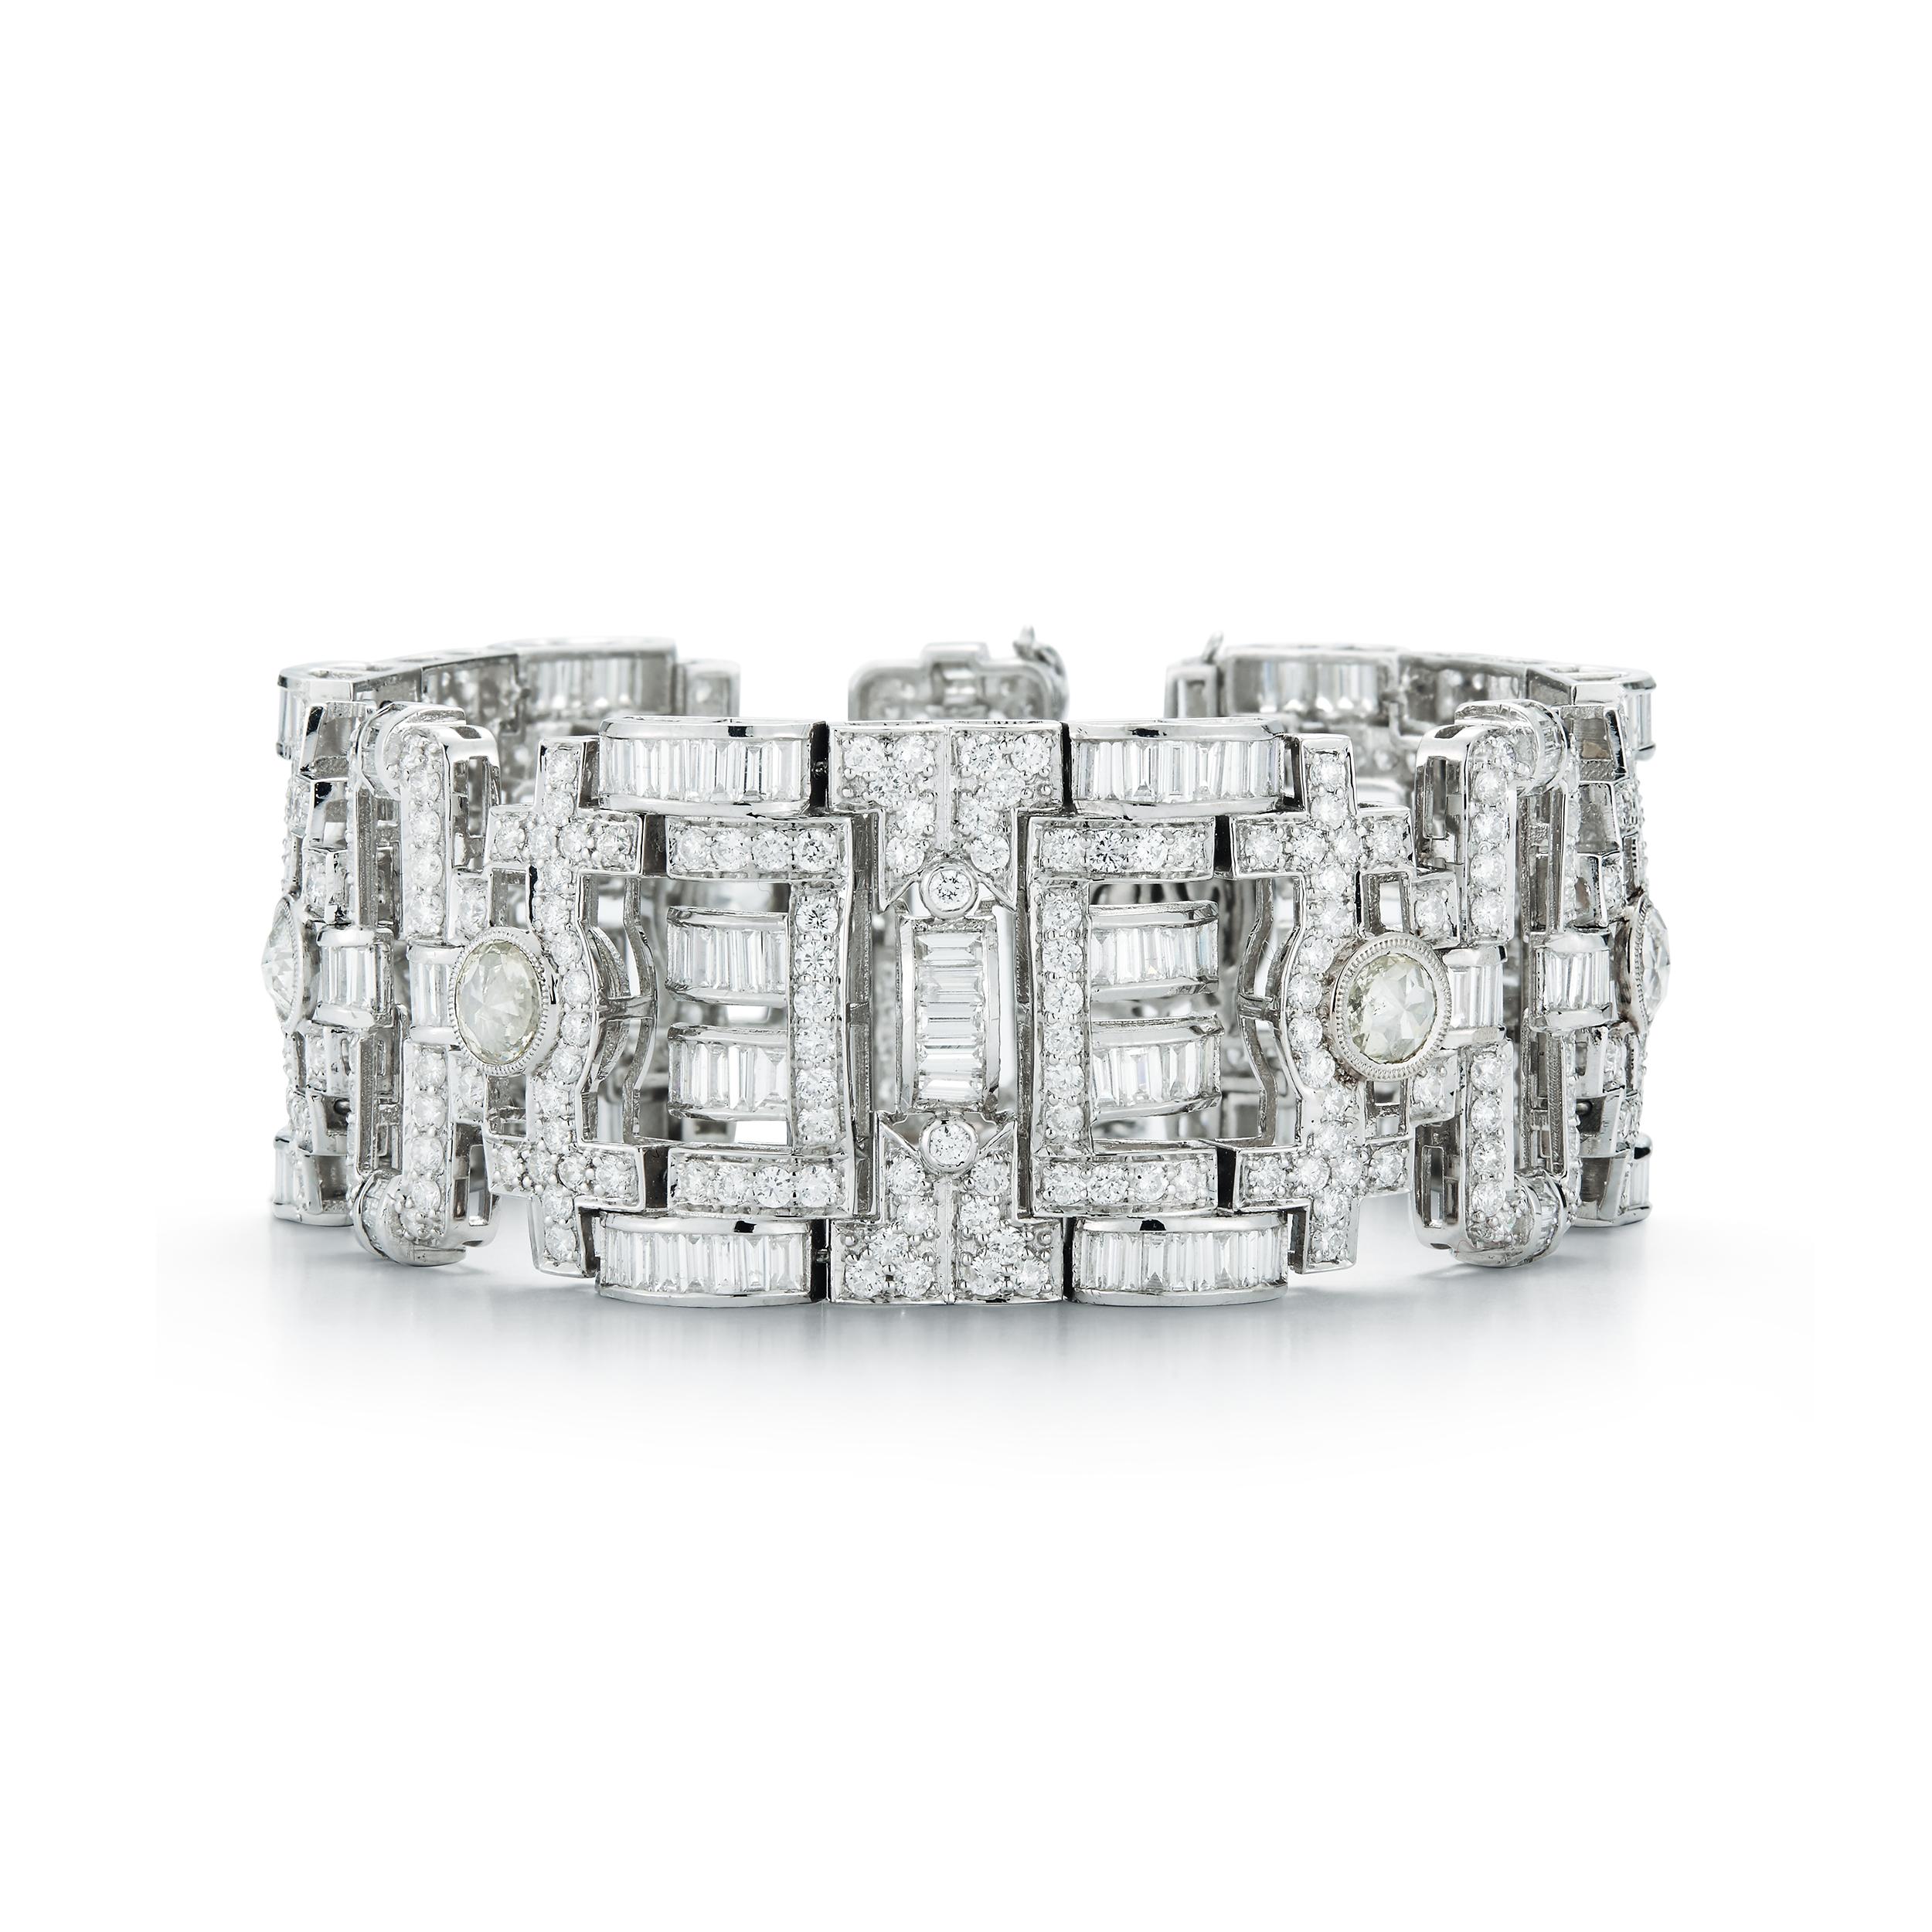 18K white gold Antique style Diamond Bracelet, set with 14.14 carat of round Diamonds, 13.16C. of Baguettes Diamonds and six round Diamonds weight Approx. 6.20C. Total weight of Diamonds 33.50C.